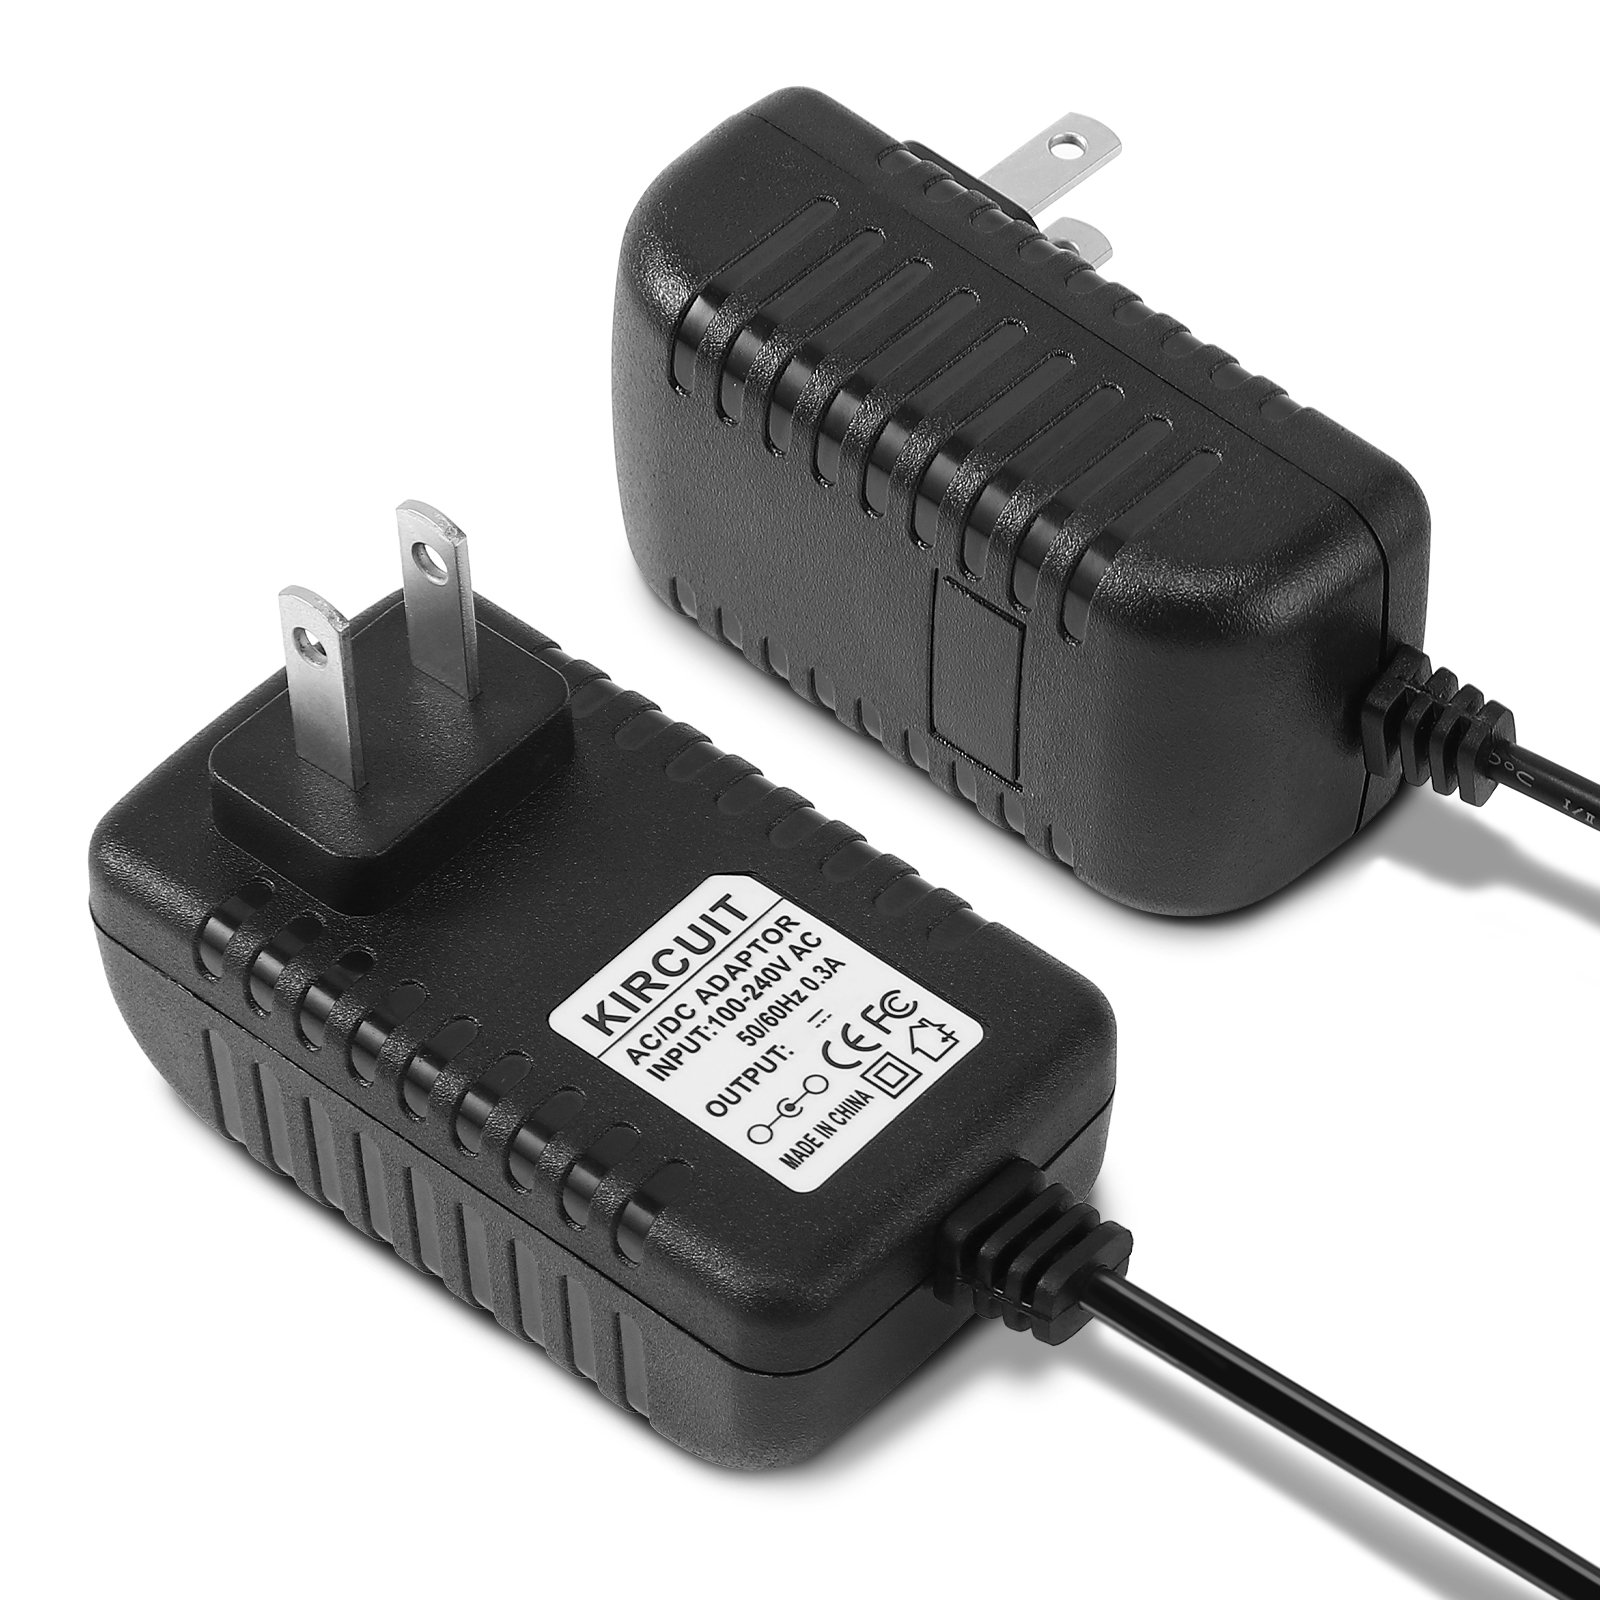 Kircuit 12V AC/DC Adapter Compatible with Roland ACO-120T Model: A41210T Boss Electric Piano Keyboard Class 2 Transformer 12VDC DC12V 12.0V 12 Volts Power Supply Cord Home Wall Charger PSU - image 2 of 4